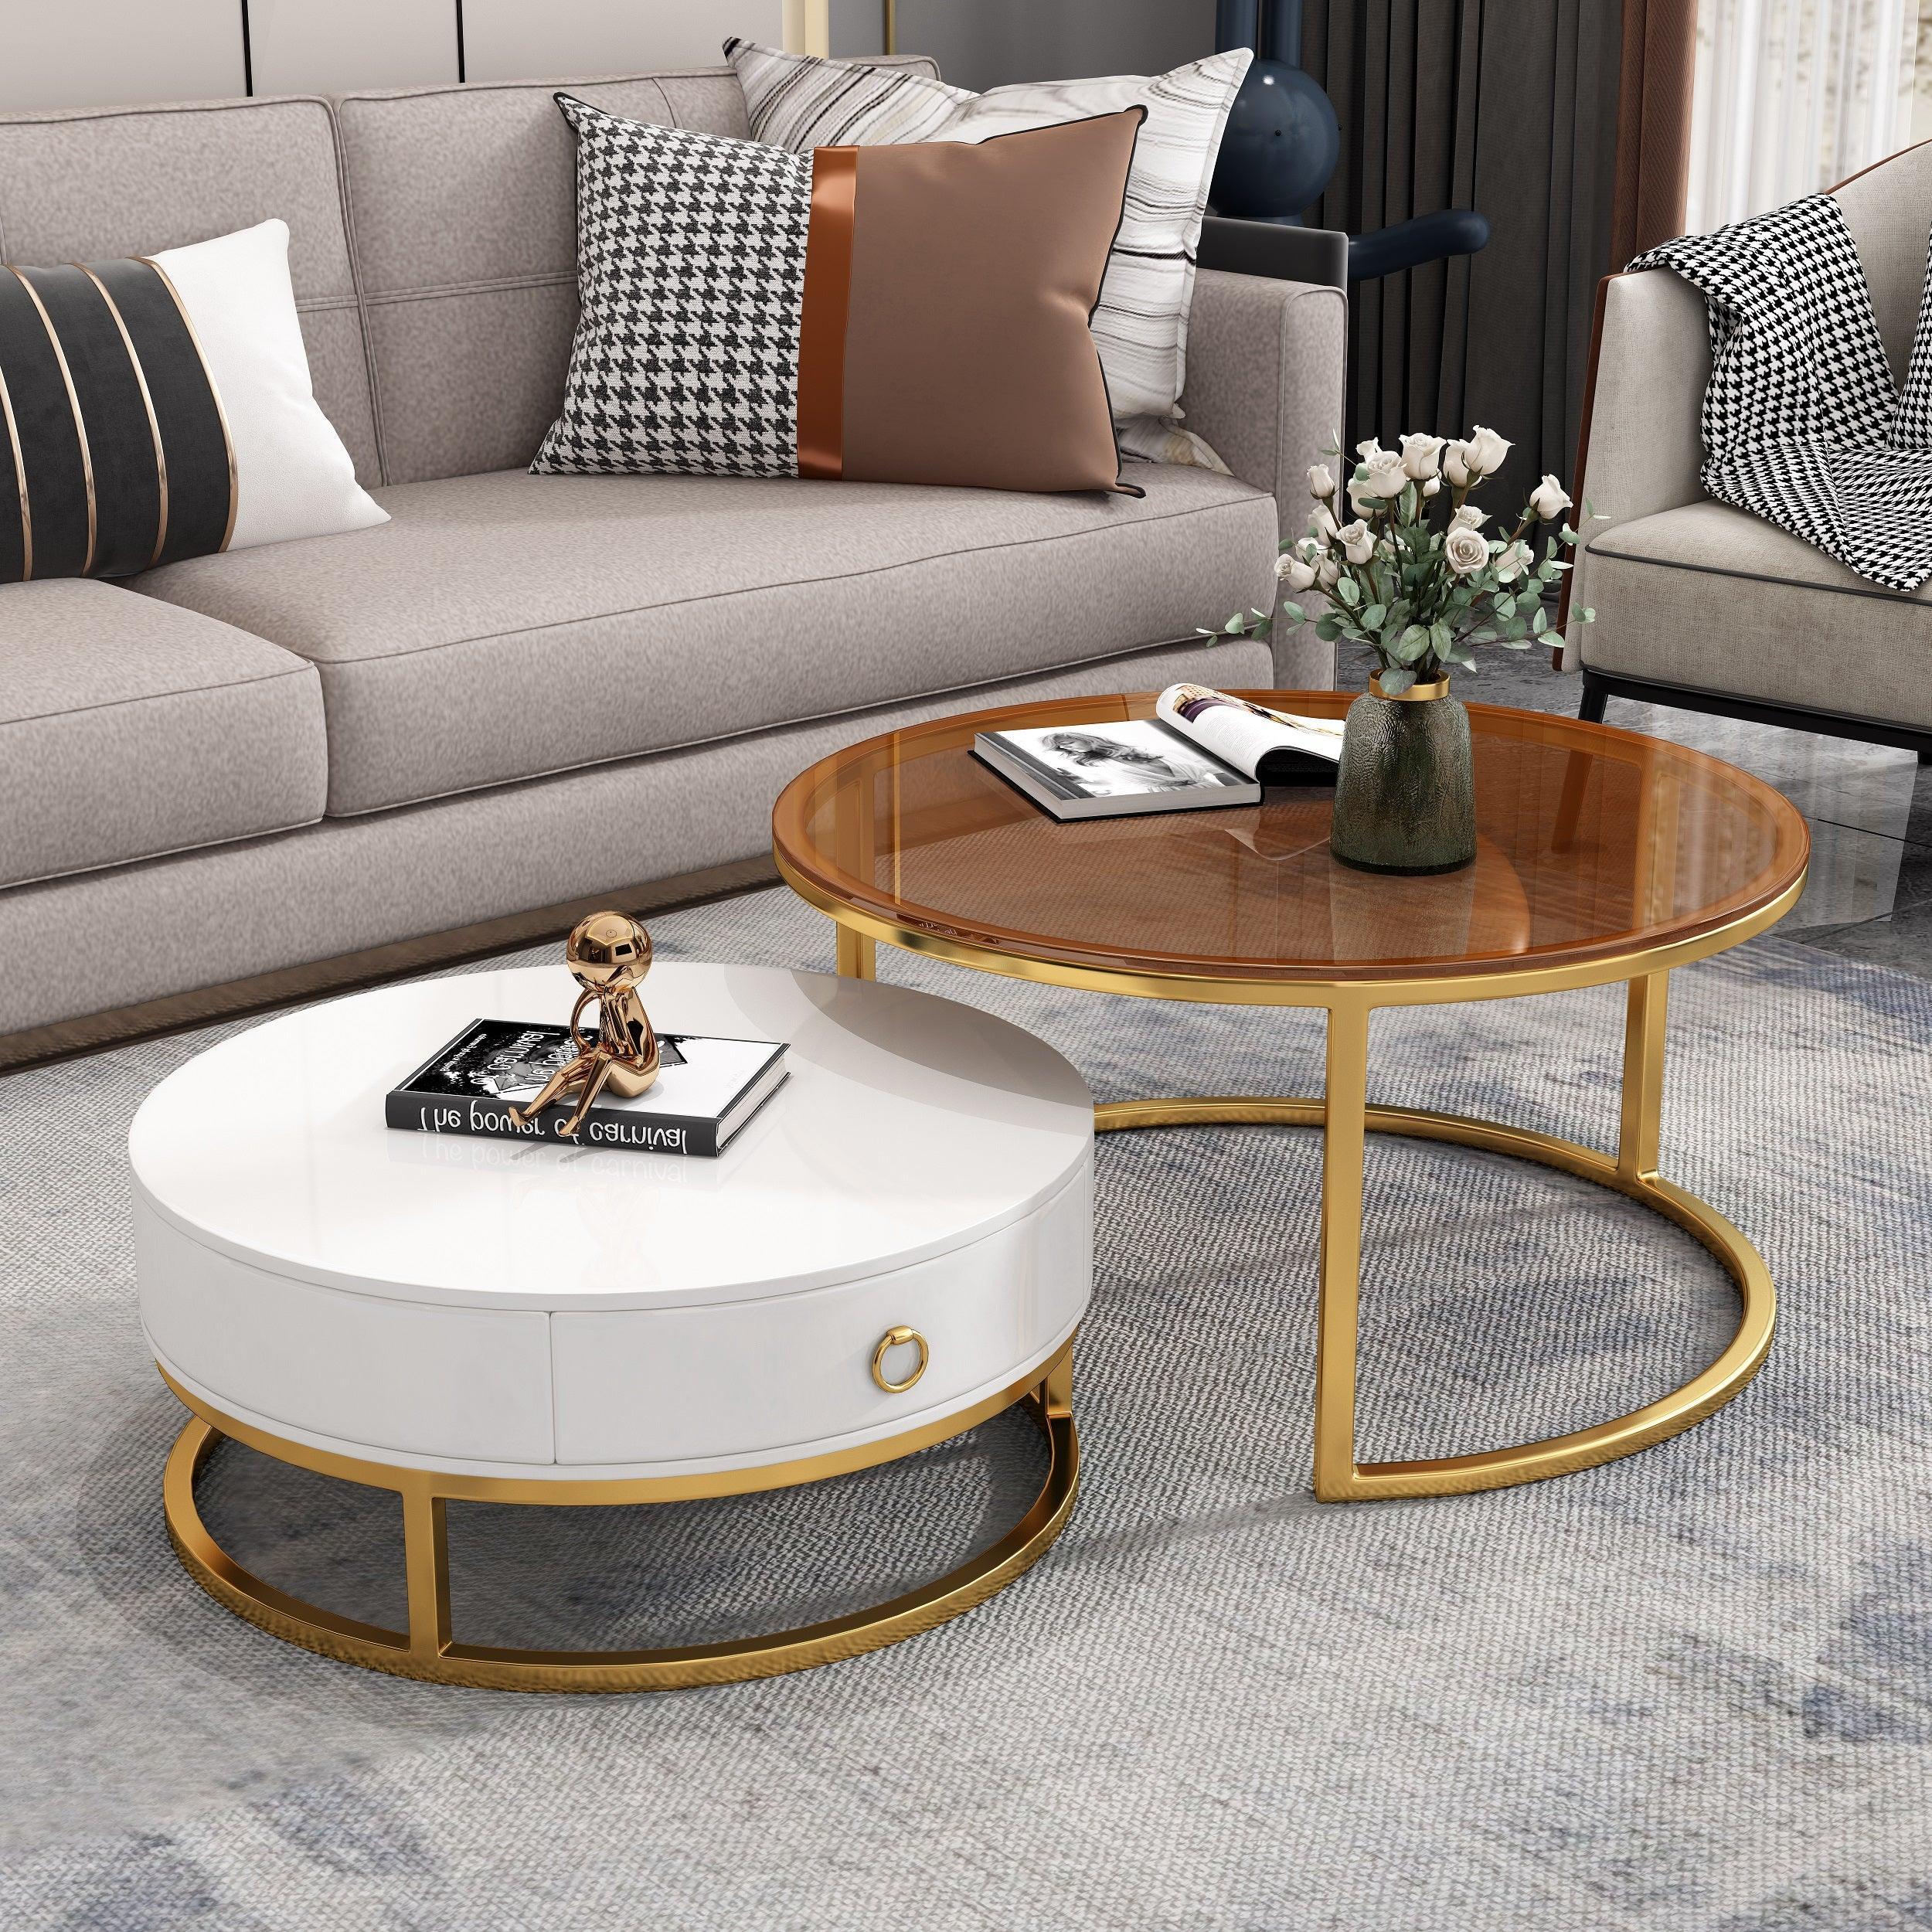 Image of The A2Z Furniture's Dodo Coffee Table set in white with gold accents and gold tempered glass. The set includes a larger round table and a smaller nesting table with a storage drawer